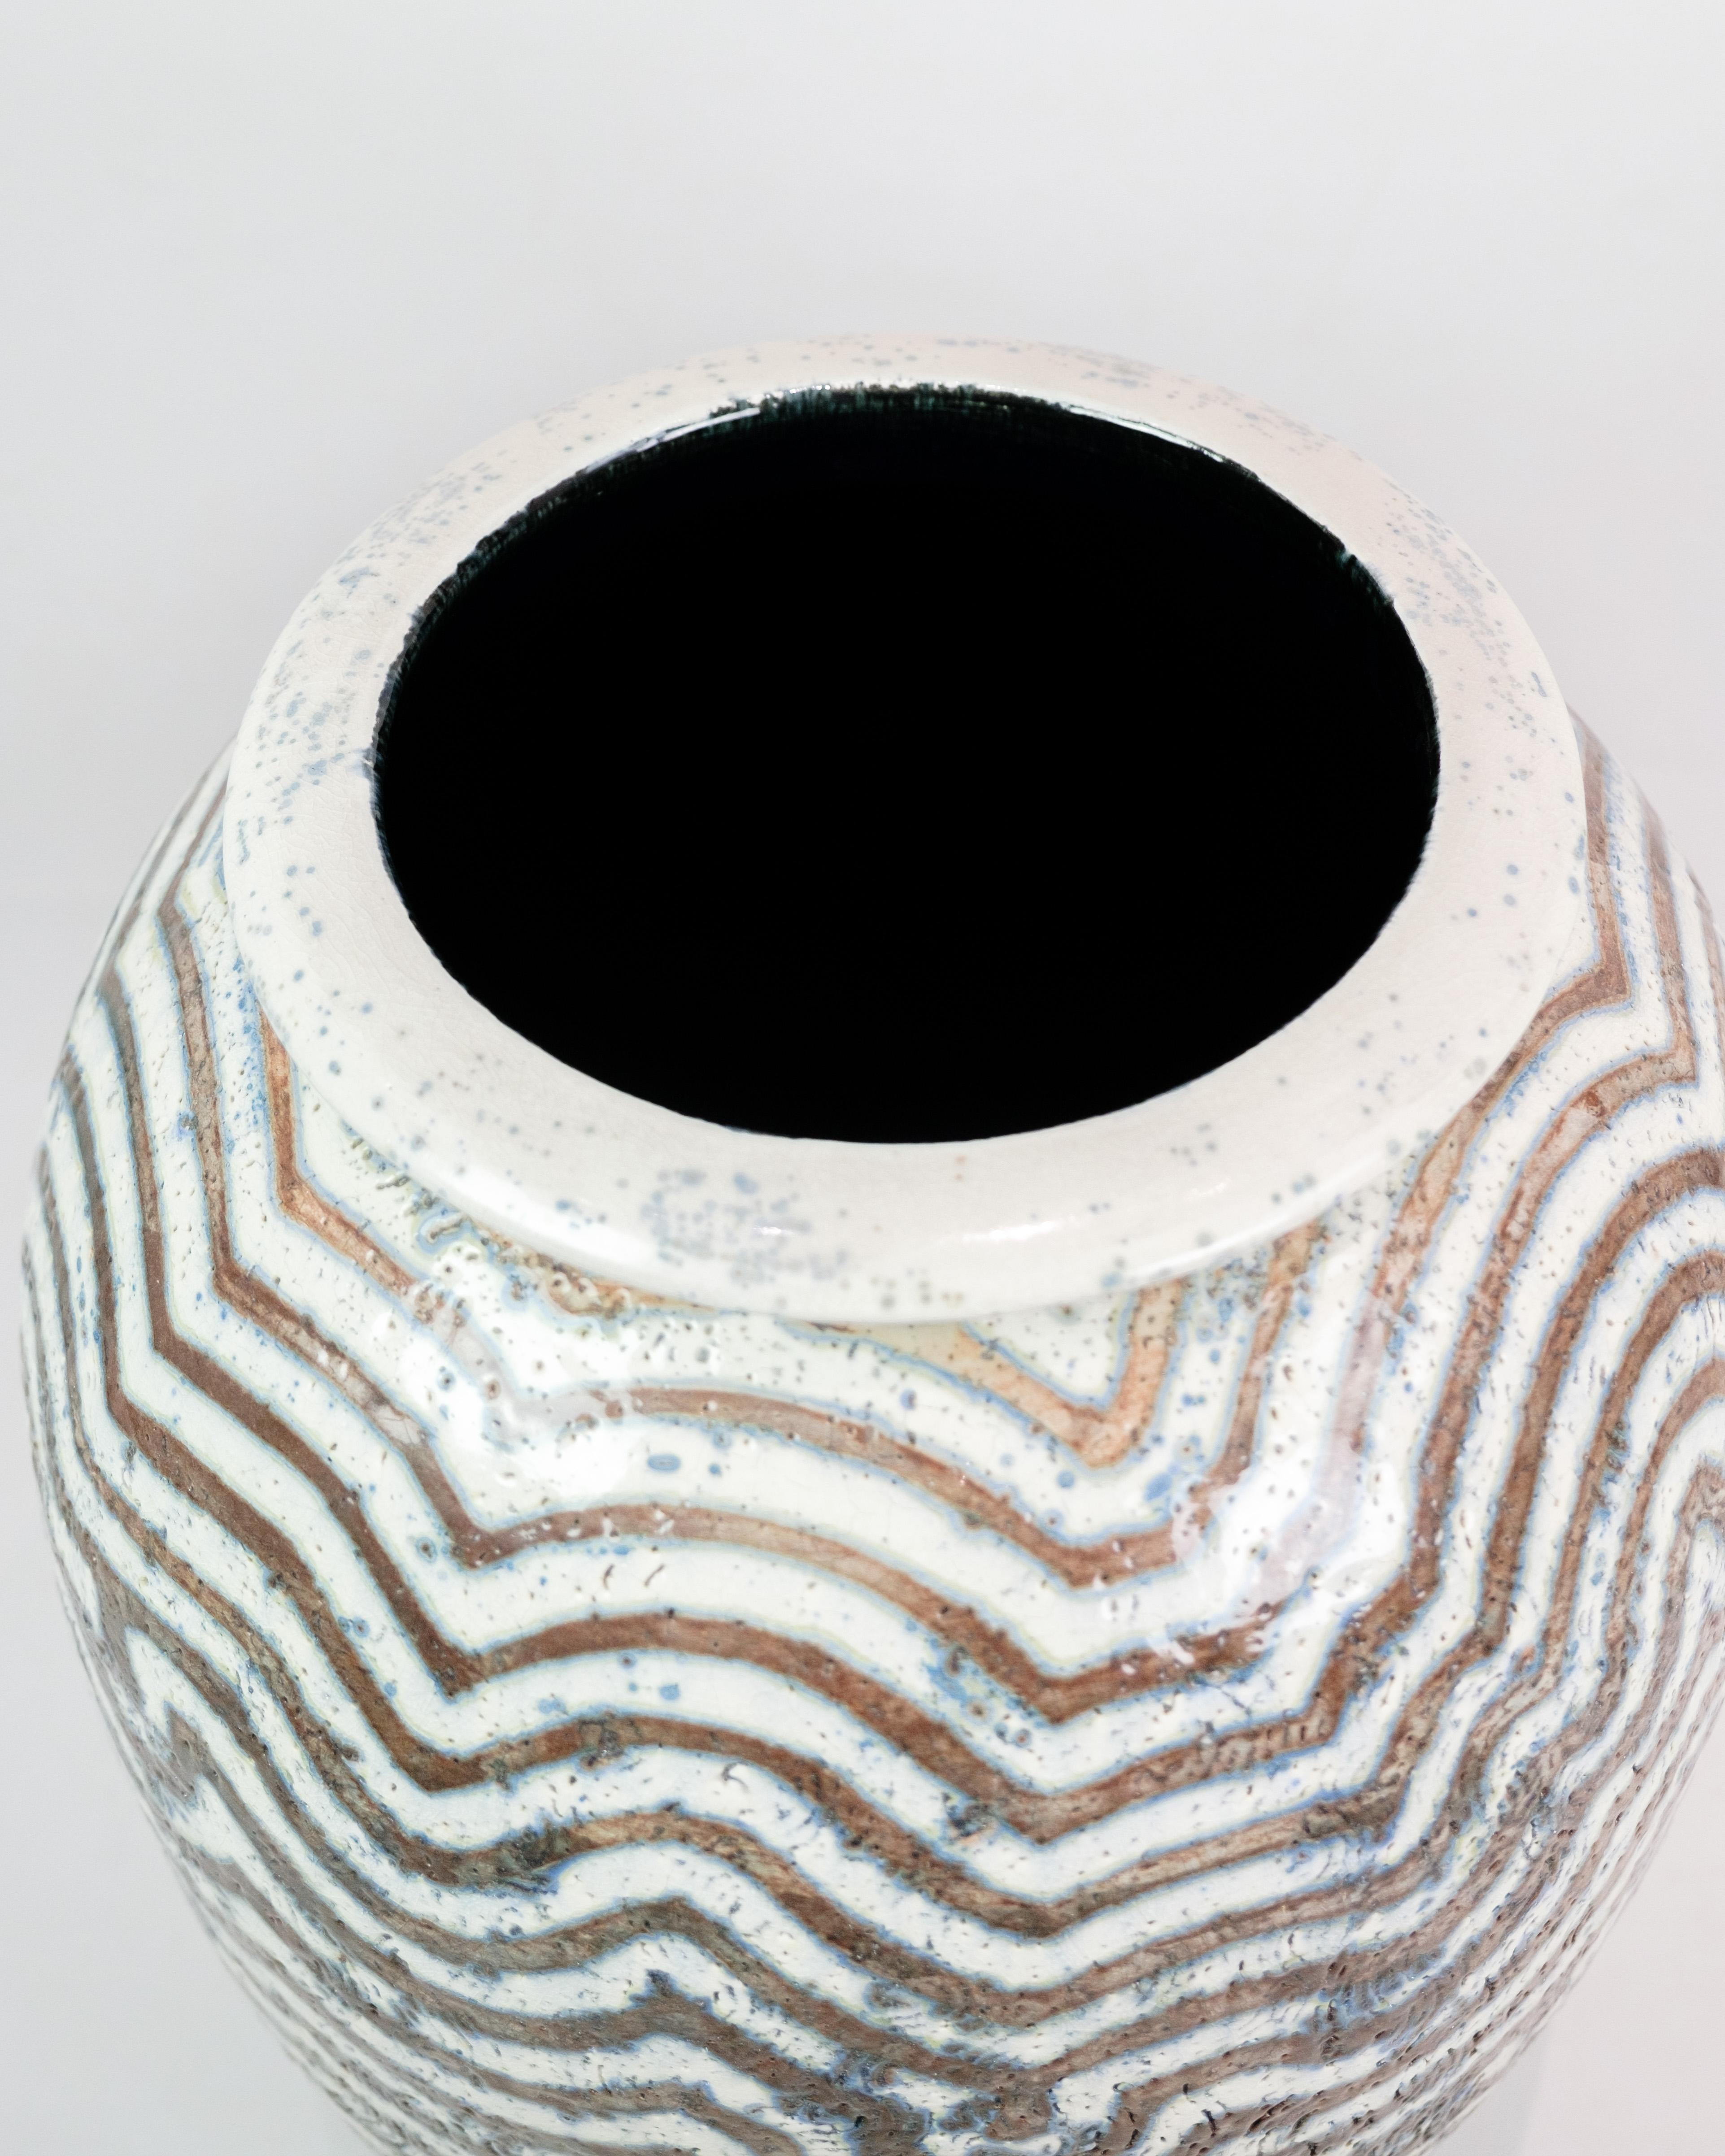 Mid-Century Modern Stoneware Floor Vase In Blue, Grey and White Designed By Per Weiss From 1980s For Sale